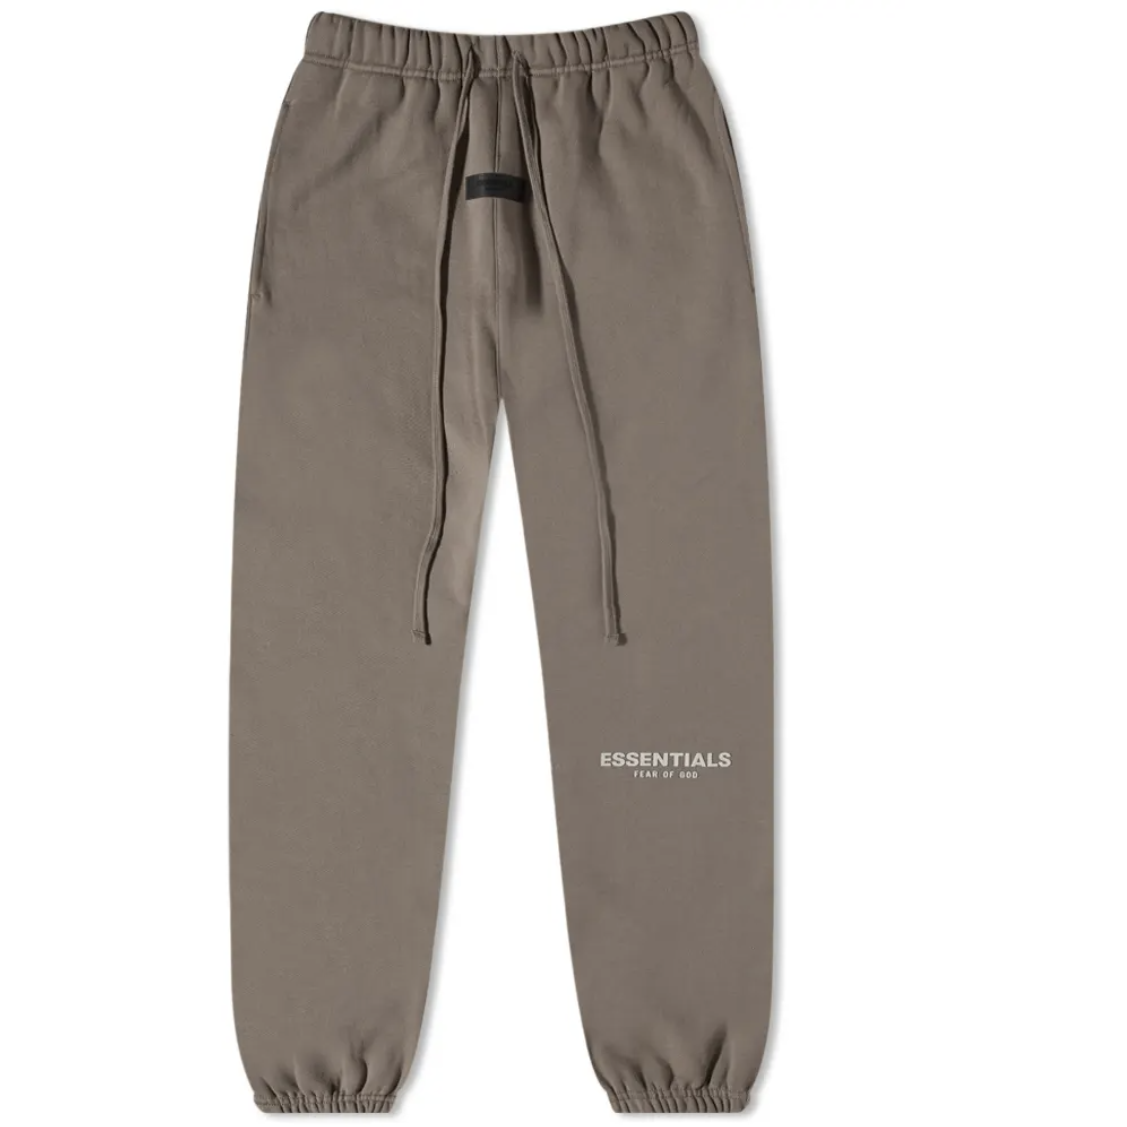 Fear of God Essentials Sweatpants - Desert Taupe from Fear Of God